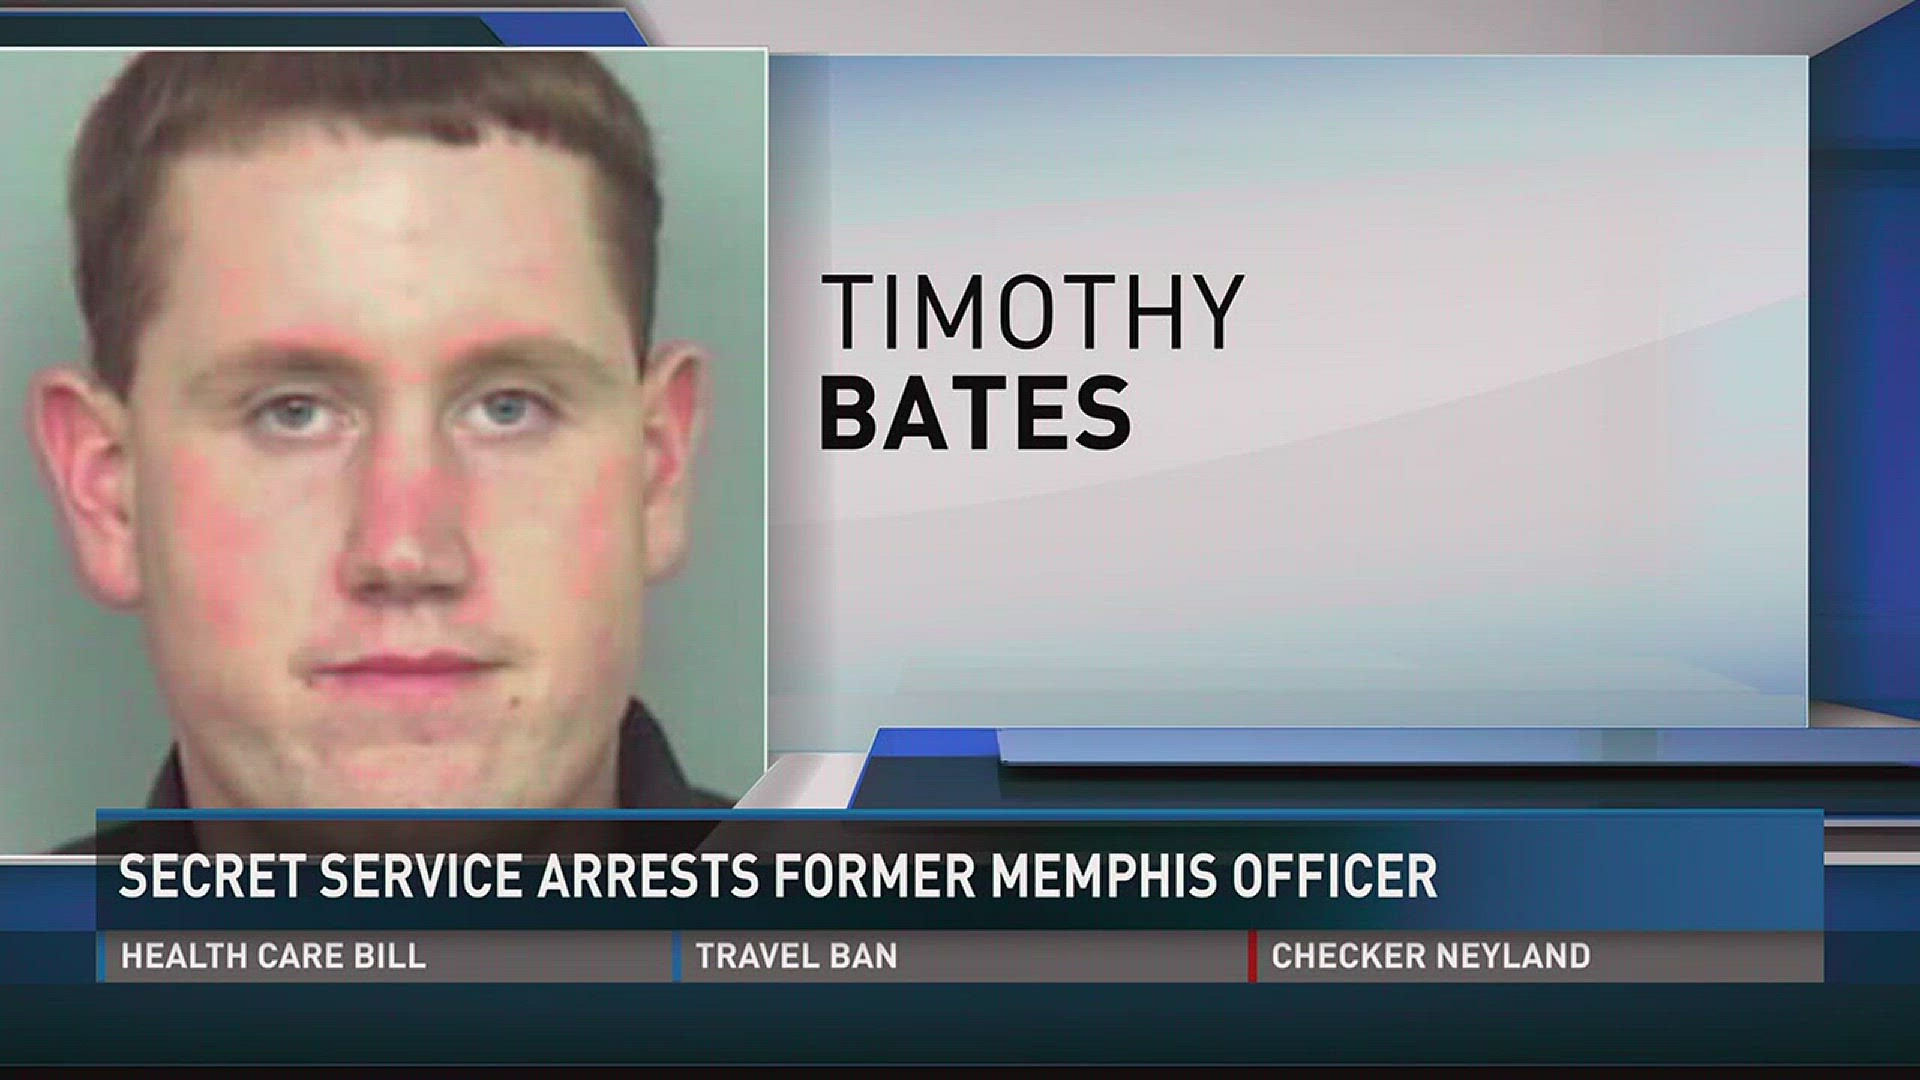 Sept. 25, 2017: Authorities arrested a former Memphis police officer near the White House over the weekend.